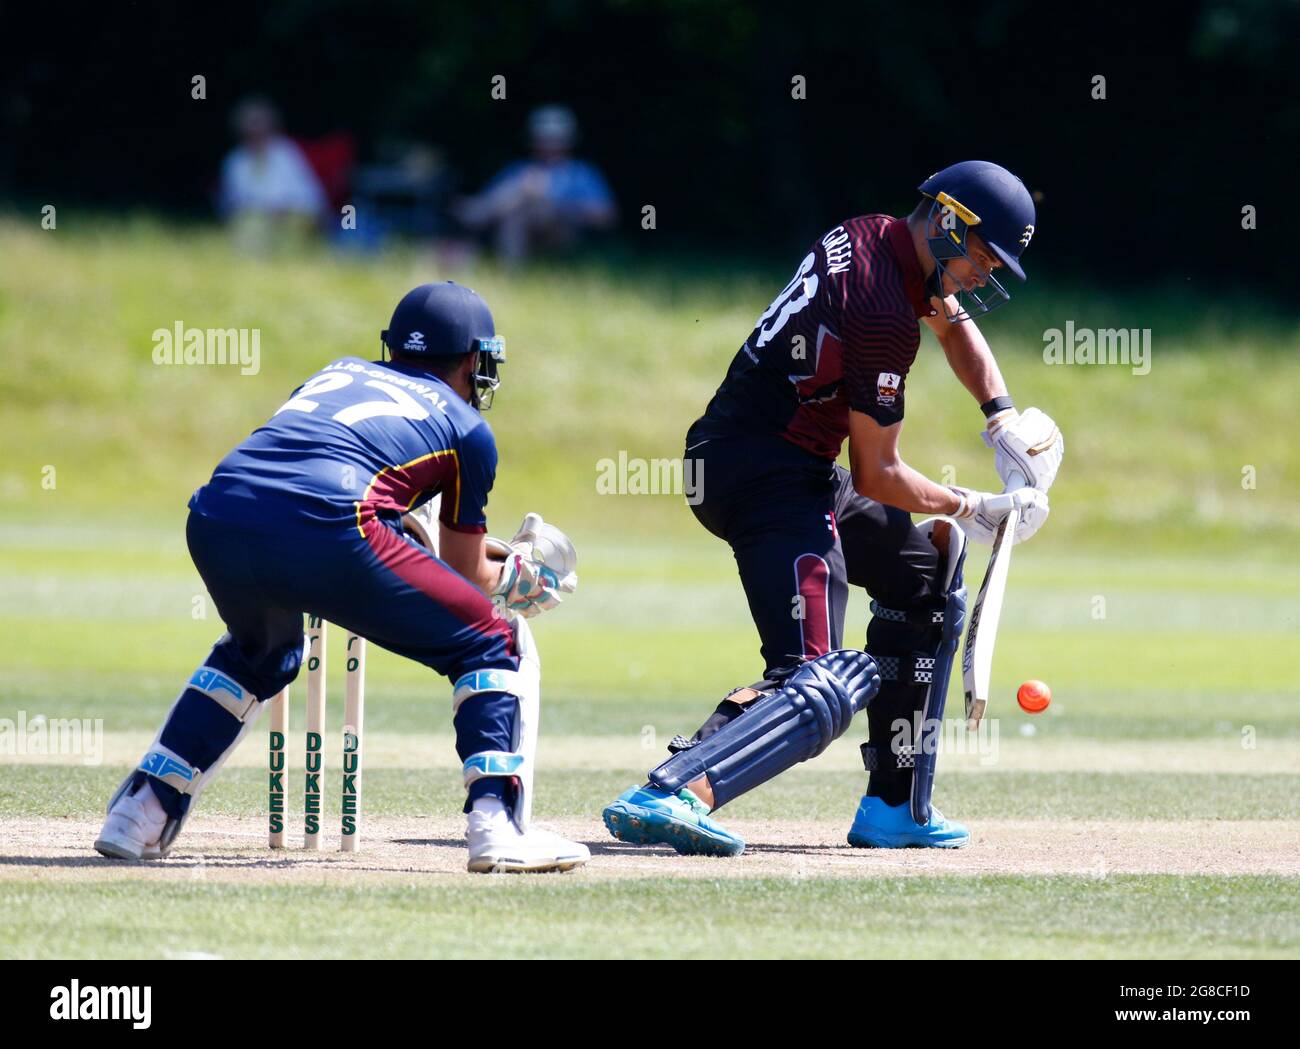 BILLERICAY, United Kingdom, JULY 18: Christopher Green of Brentwood cc and Middlesexduring Dukes Essex T20 Competition - Final between Wanstead and Sn Stock Photo